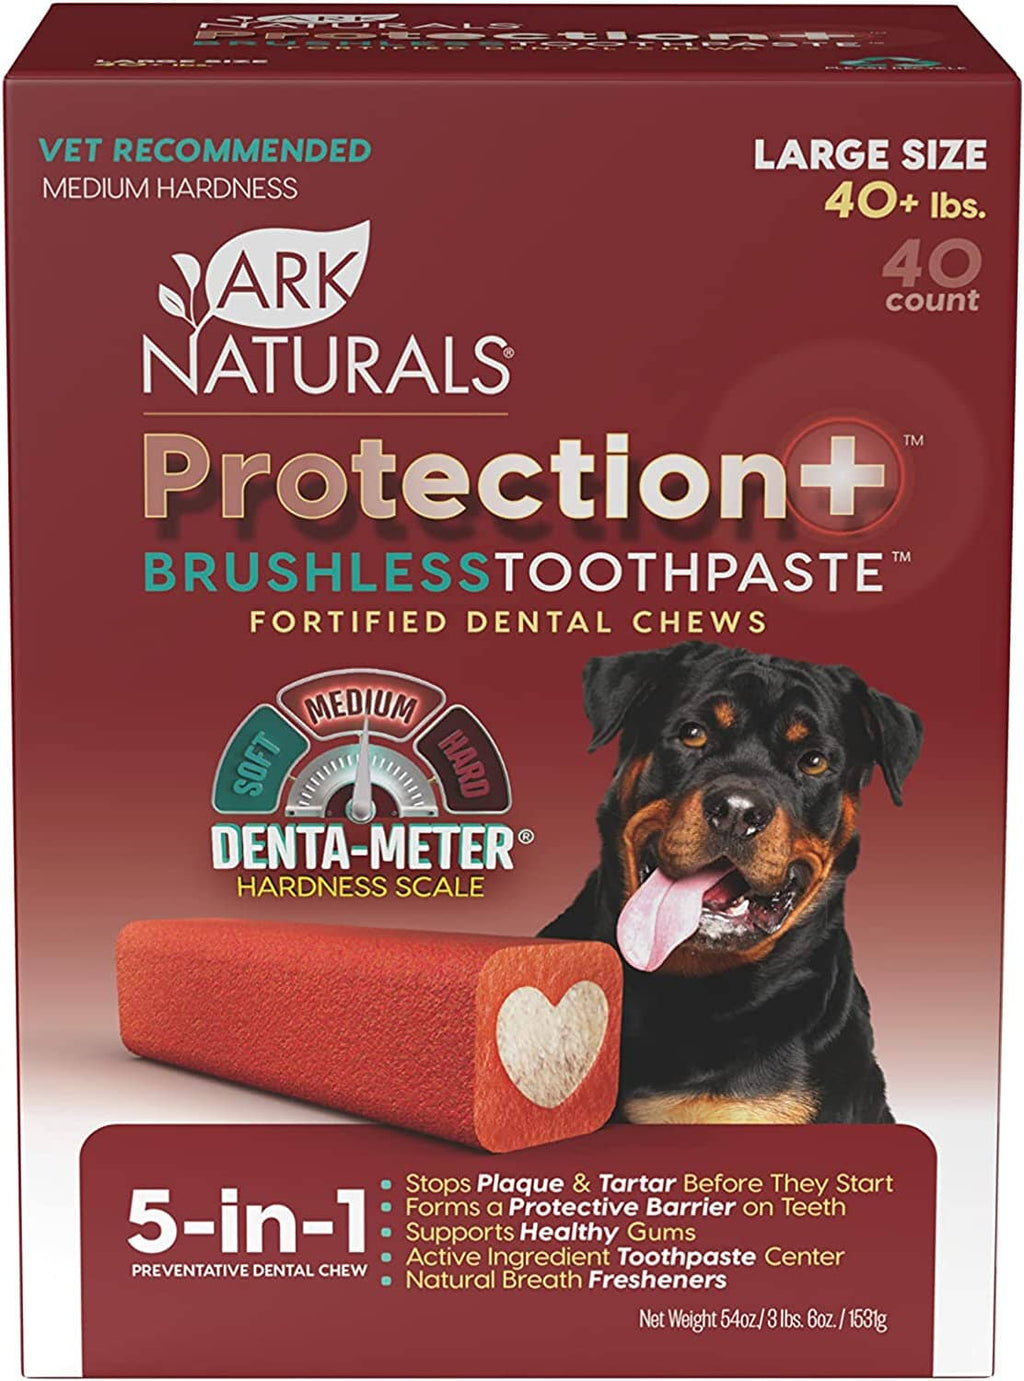 Ark Naturals Protection+ Brushless Toothpaste Value Pack Dental Dog Chews - Large - 40 ...